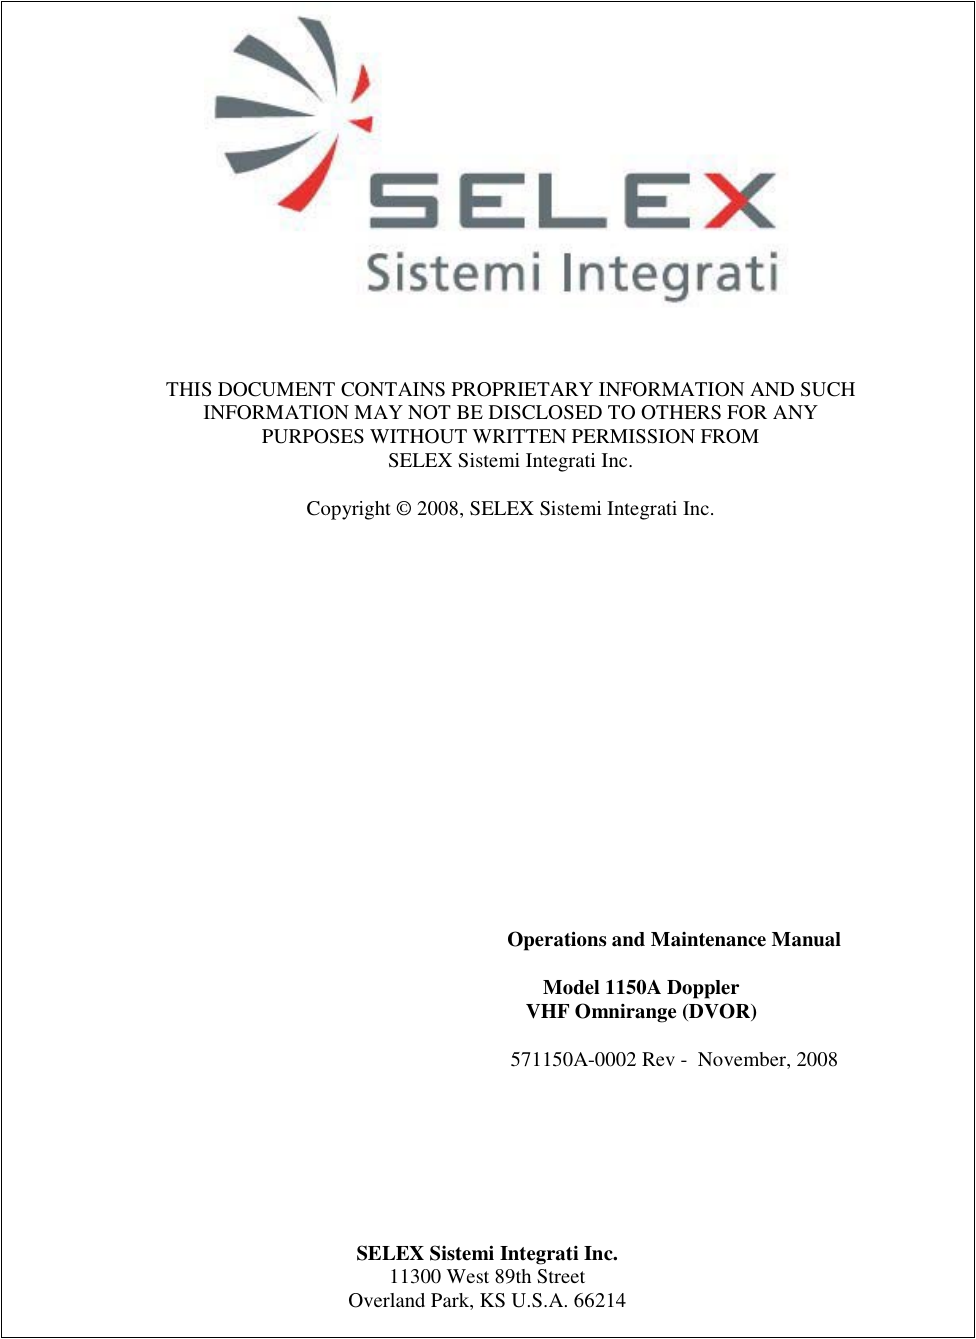 THIS DOCUMENT CONTAINS PROPRIETARY INFORMATION AND SUCH INFORMATION MAY NOT BE DISCLOSED TO OTHERS FOR ANY PURPOSES WITHOUT WRITTEN PERMISSION FROM SELEX Sistemi Integrati Inc.  Copyright © 2008, SELEX Sistemi Integrati Inc.  Operations and Maintenance Manual  Model 1150A Doppler VHF Omnirange (DVOR)  571150A-0002 Rev -  November, 2008 SELEX Sistemi Integrati Inc. 11300 West 89th Street Overland Park, KS U.S.A. 66214  